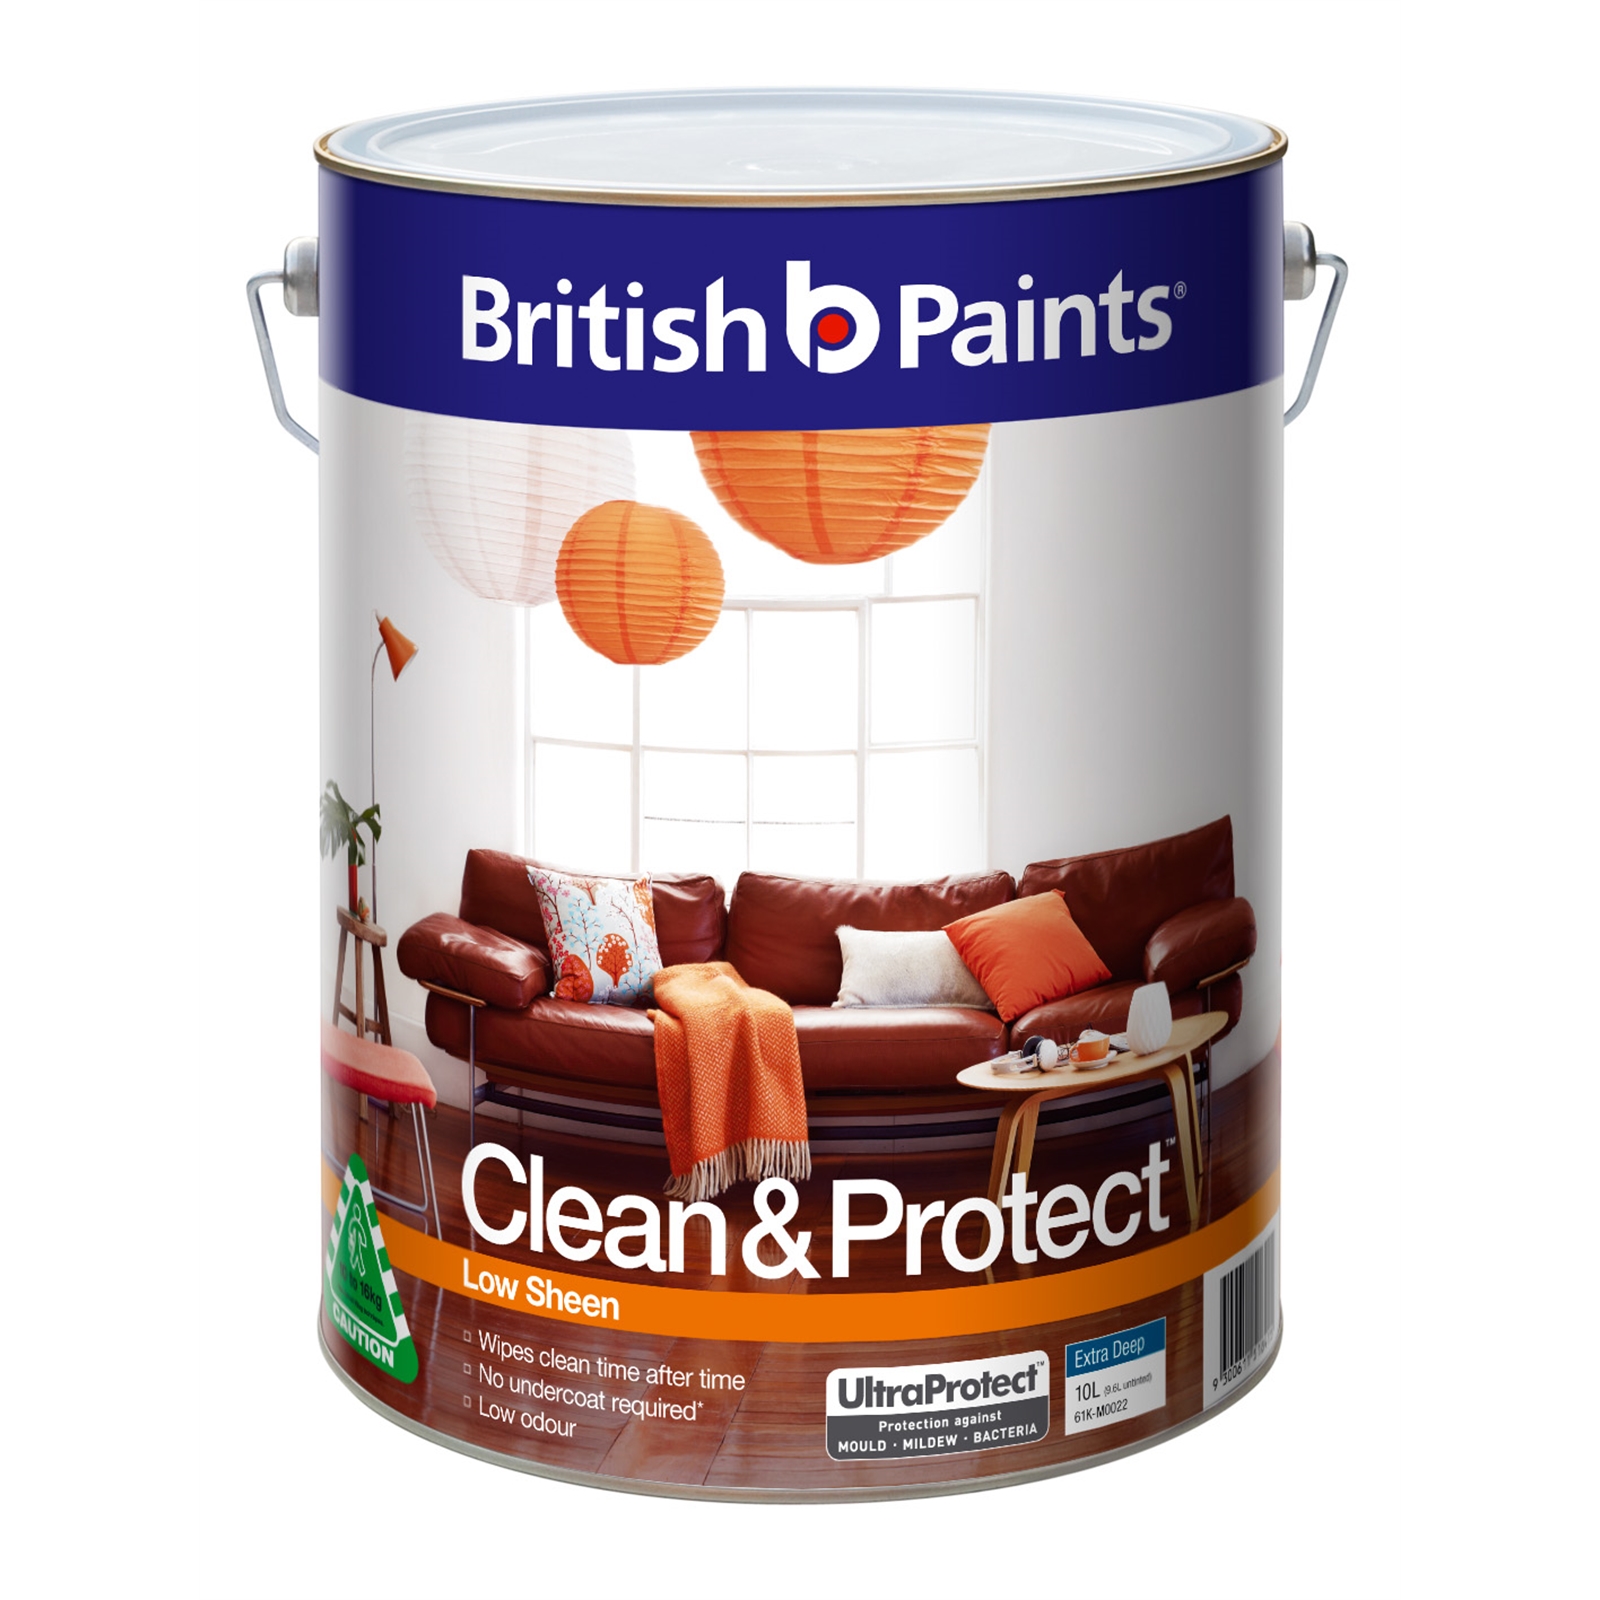 British Paints Clean & Protect 10L Low Sheen Extra Deep Interior Paint